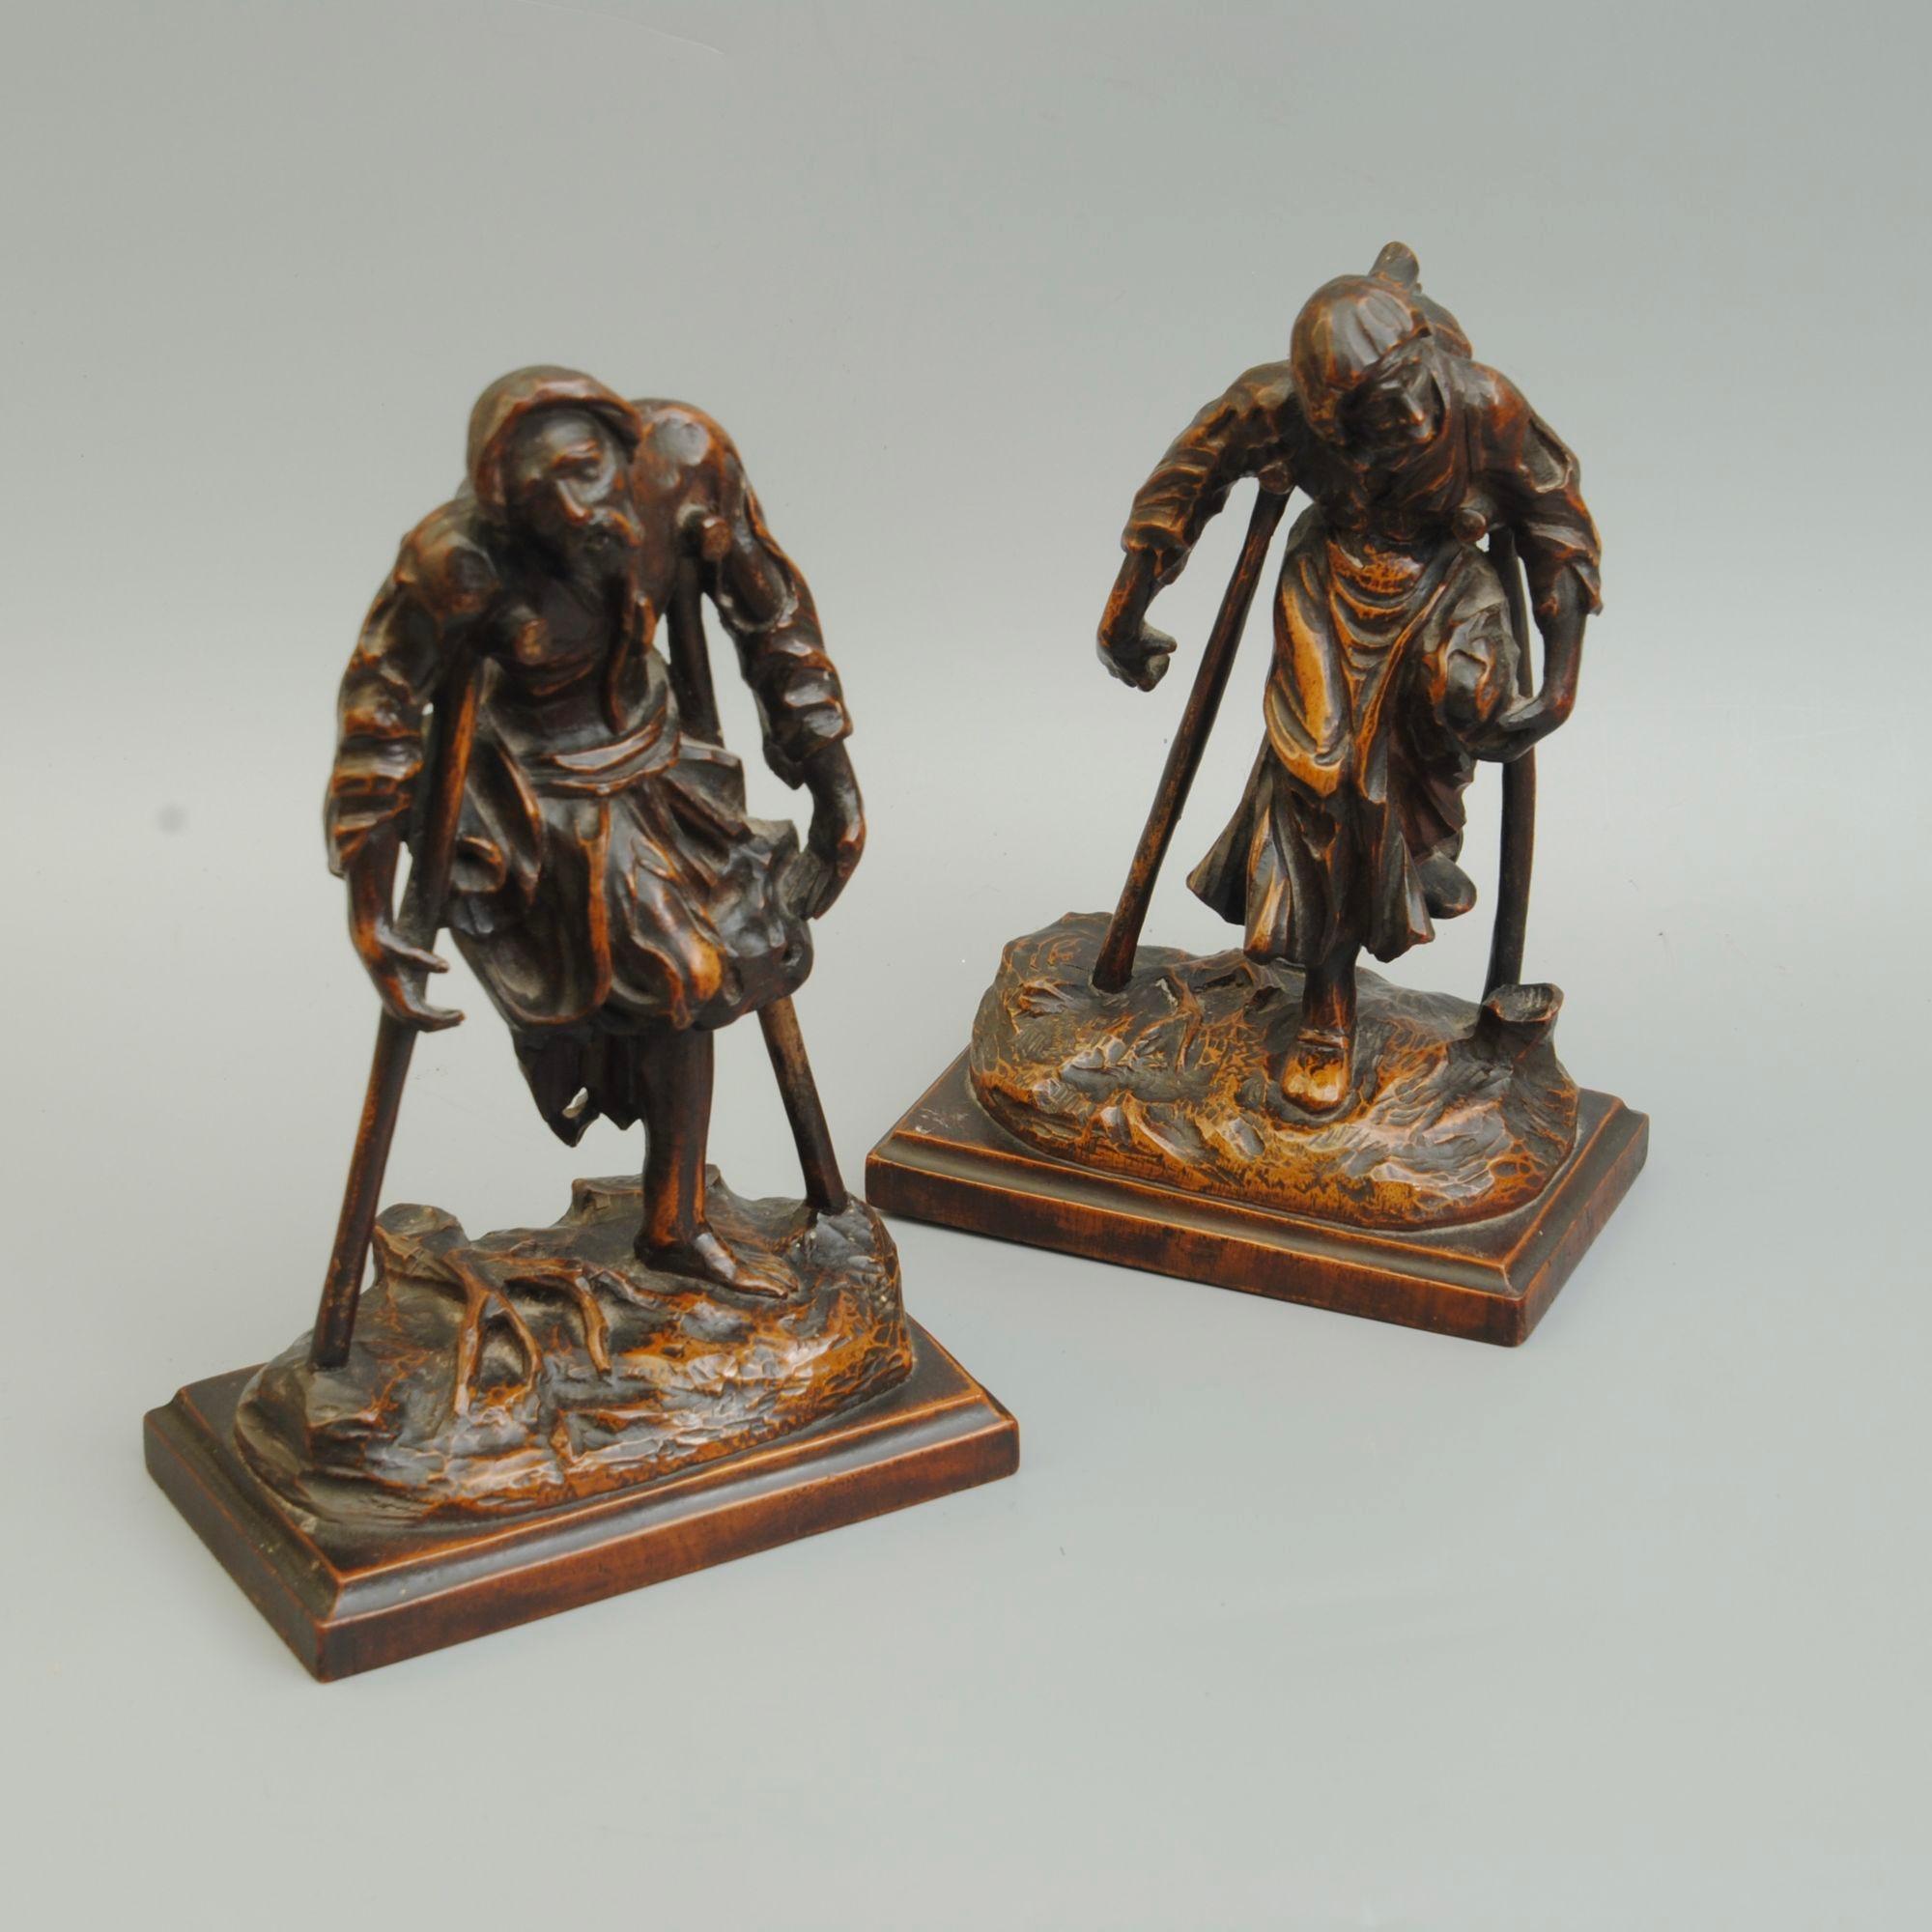 A pair of 18th century German figures of one legged beggars after the engravings of Rembrandt in box wood.
Circa 1780